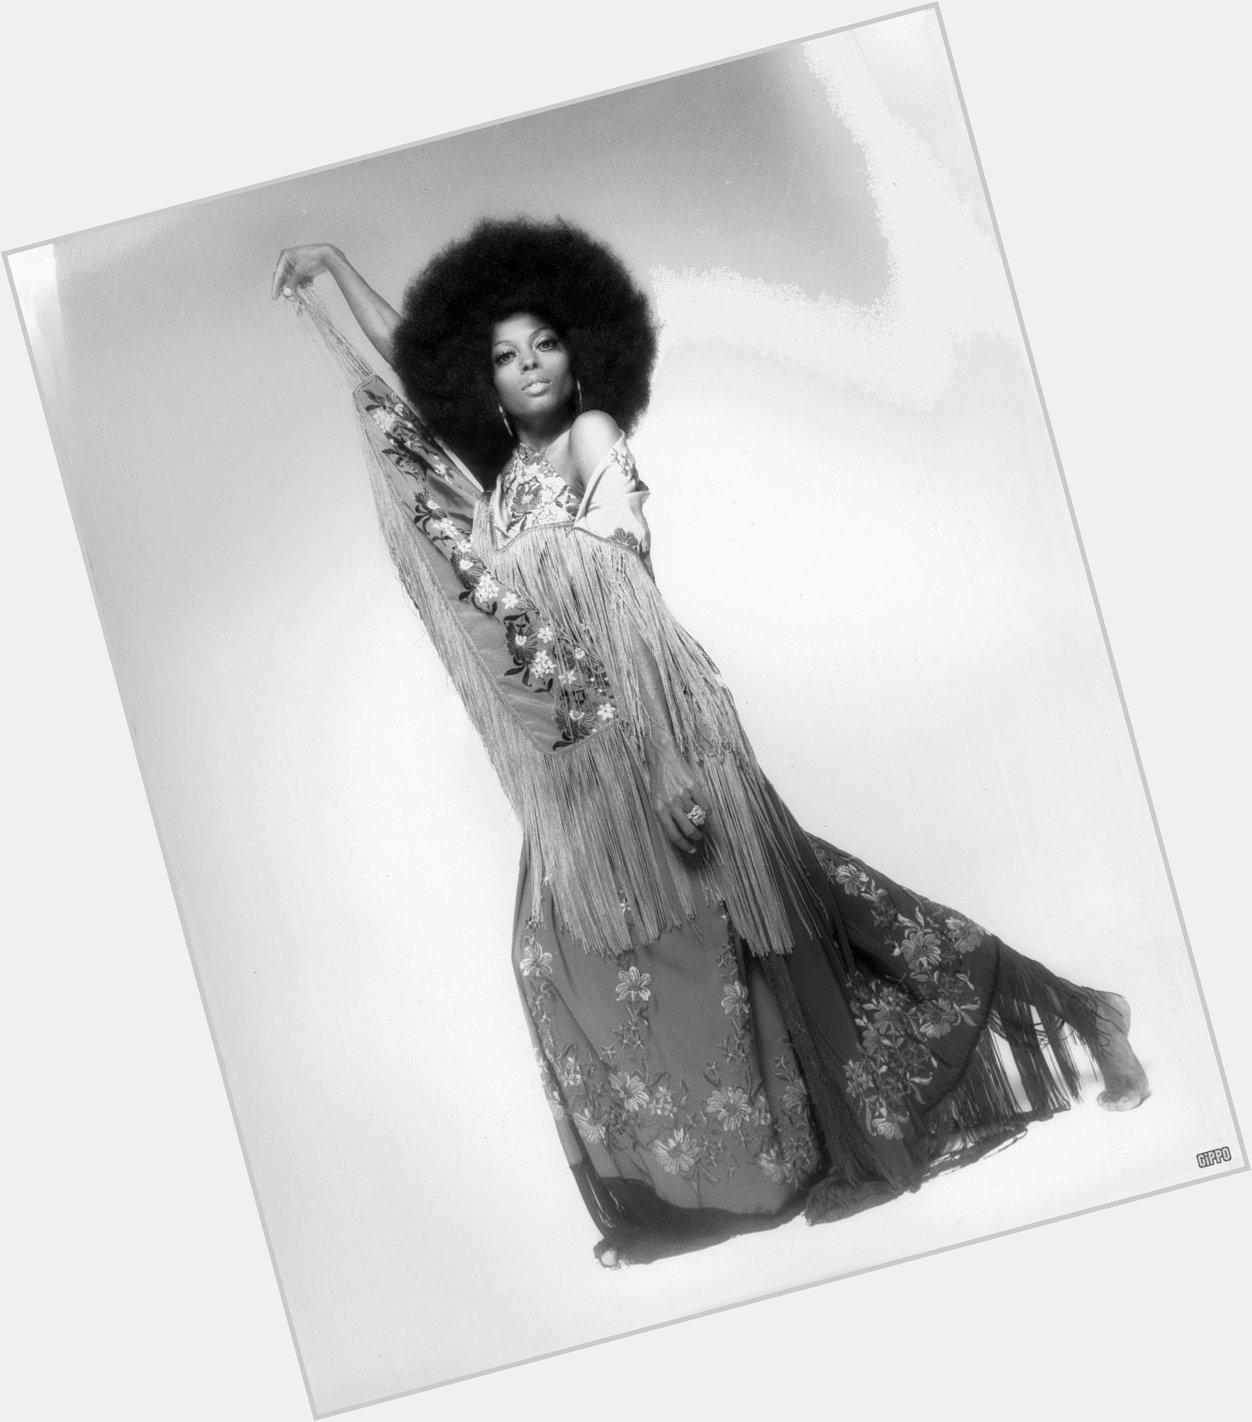 Today\s Dream Girl: 
the ambitious & creative Diana Ross!

Happy Birthday to a Queen. 